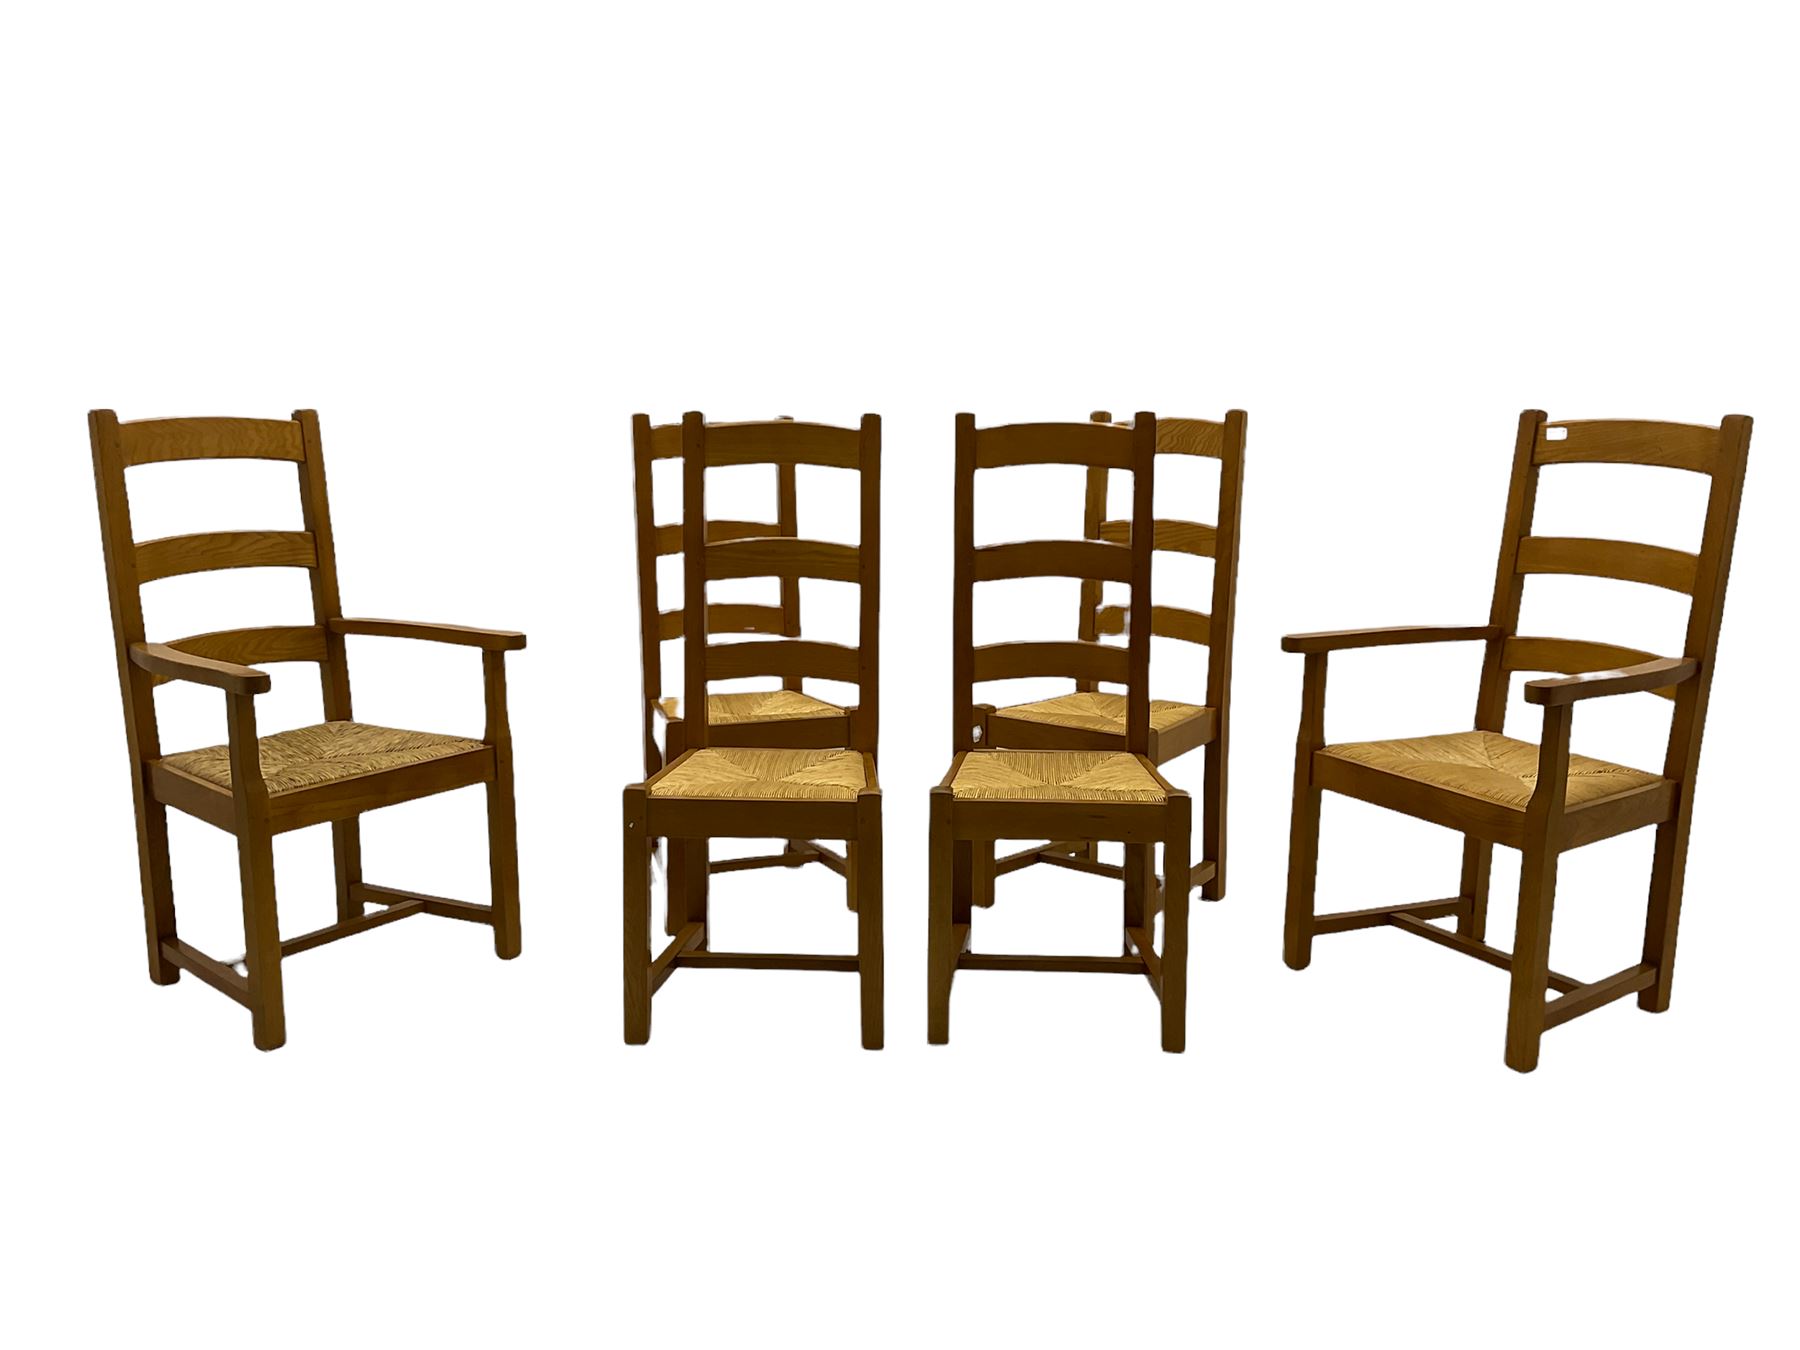 Set of six light oak dining chairs - Image 6 of 6